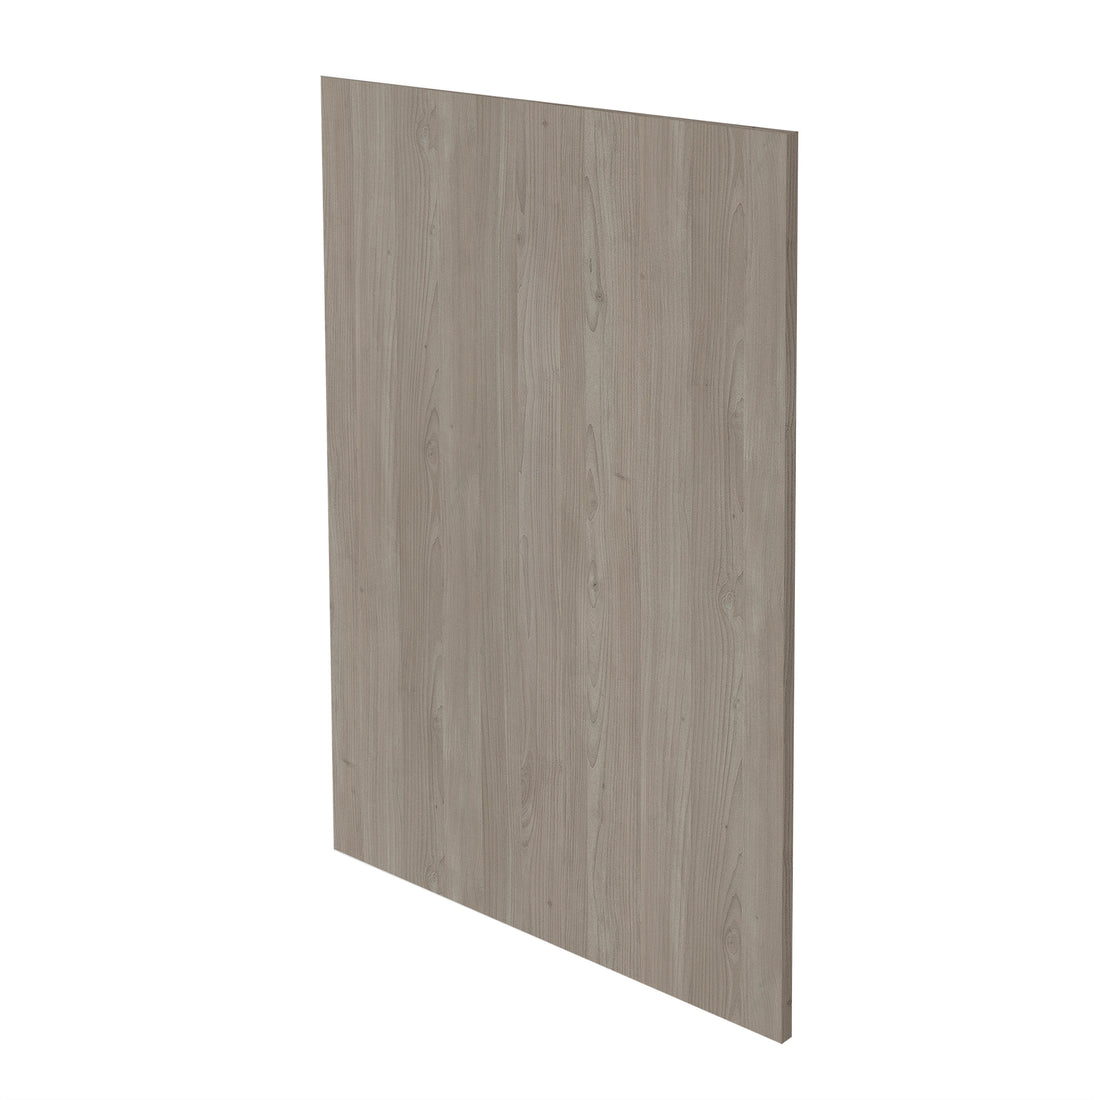 Grey Nordic Slab Style Base Kitchen Cabinet End Panel (36 in W x 0.75 in D x 34.5 in H) -  Pro-Edge HD